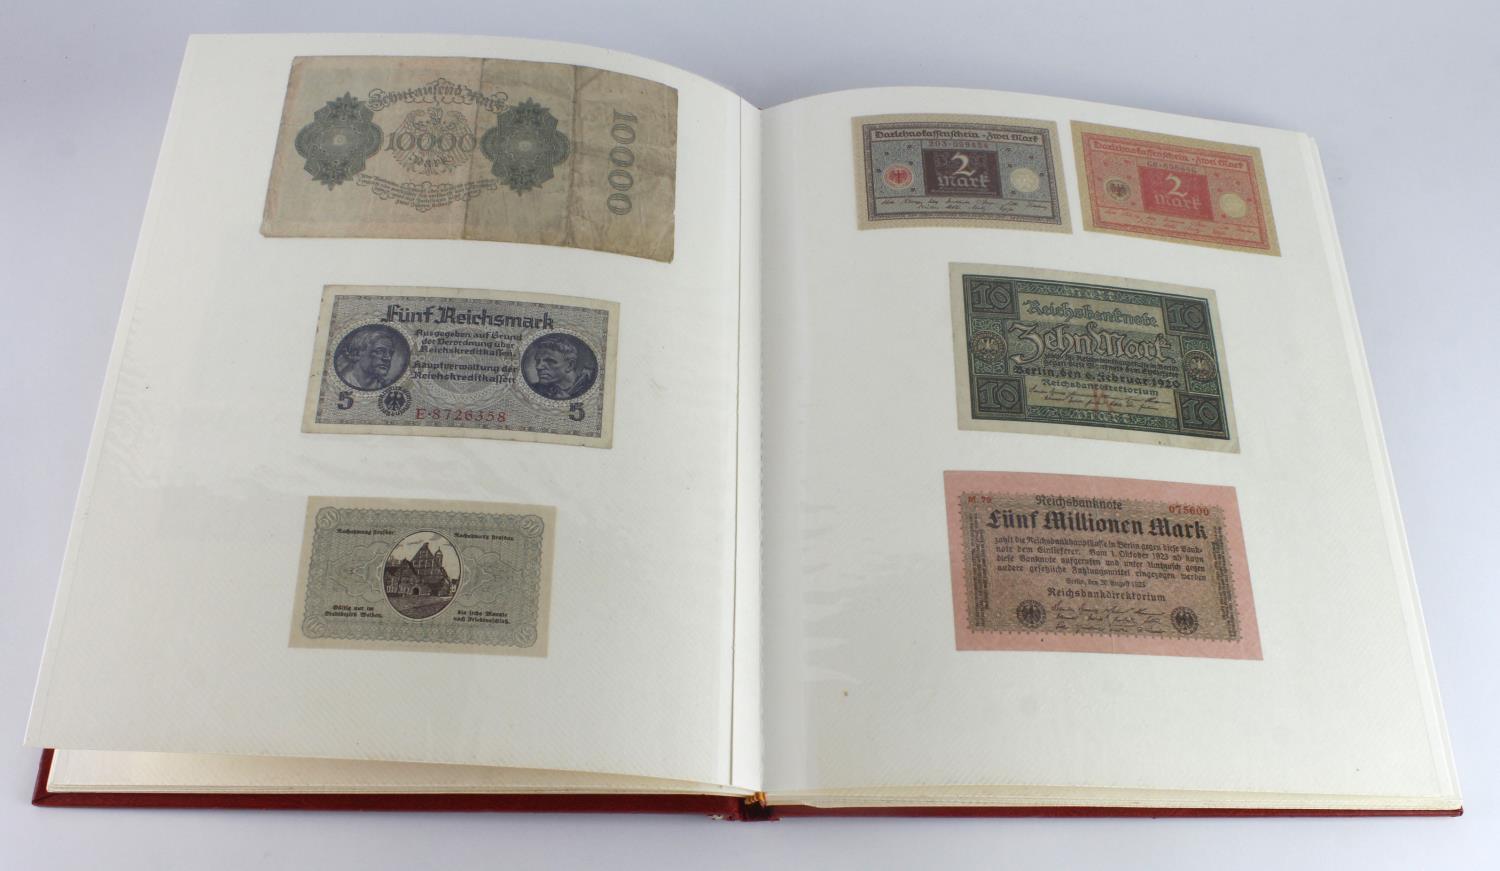 World in 2 albums (178), including Bank of England, Egypt, Hong Kong, China, Russia, Germany, - Image 7 of 8